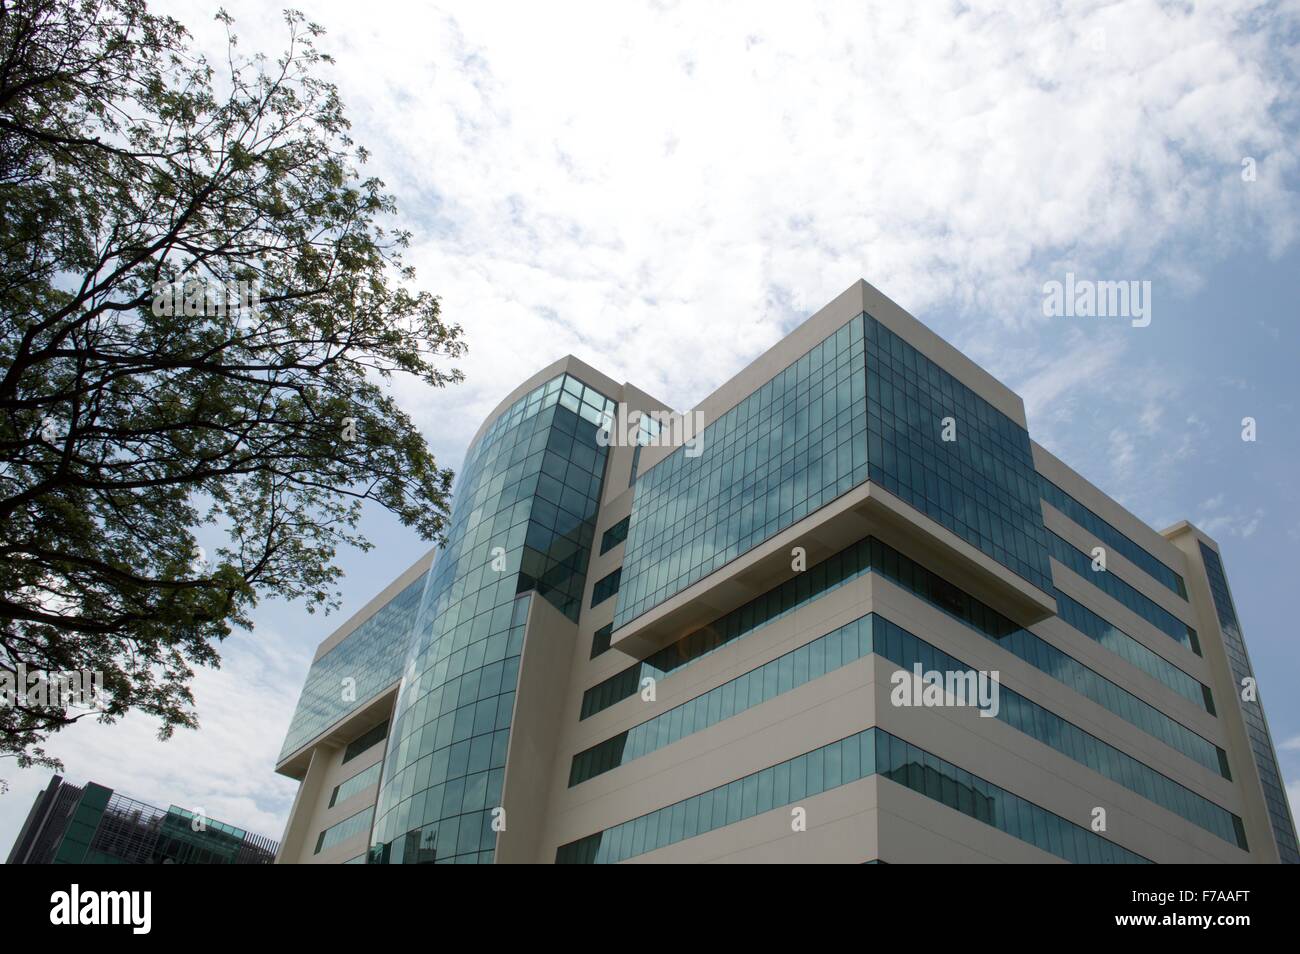 Multi-story research lab in singapore Stock Photo